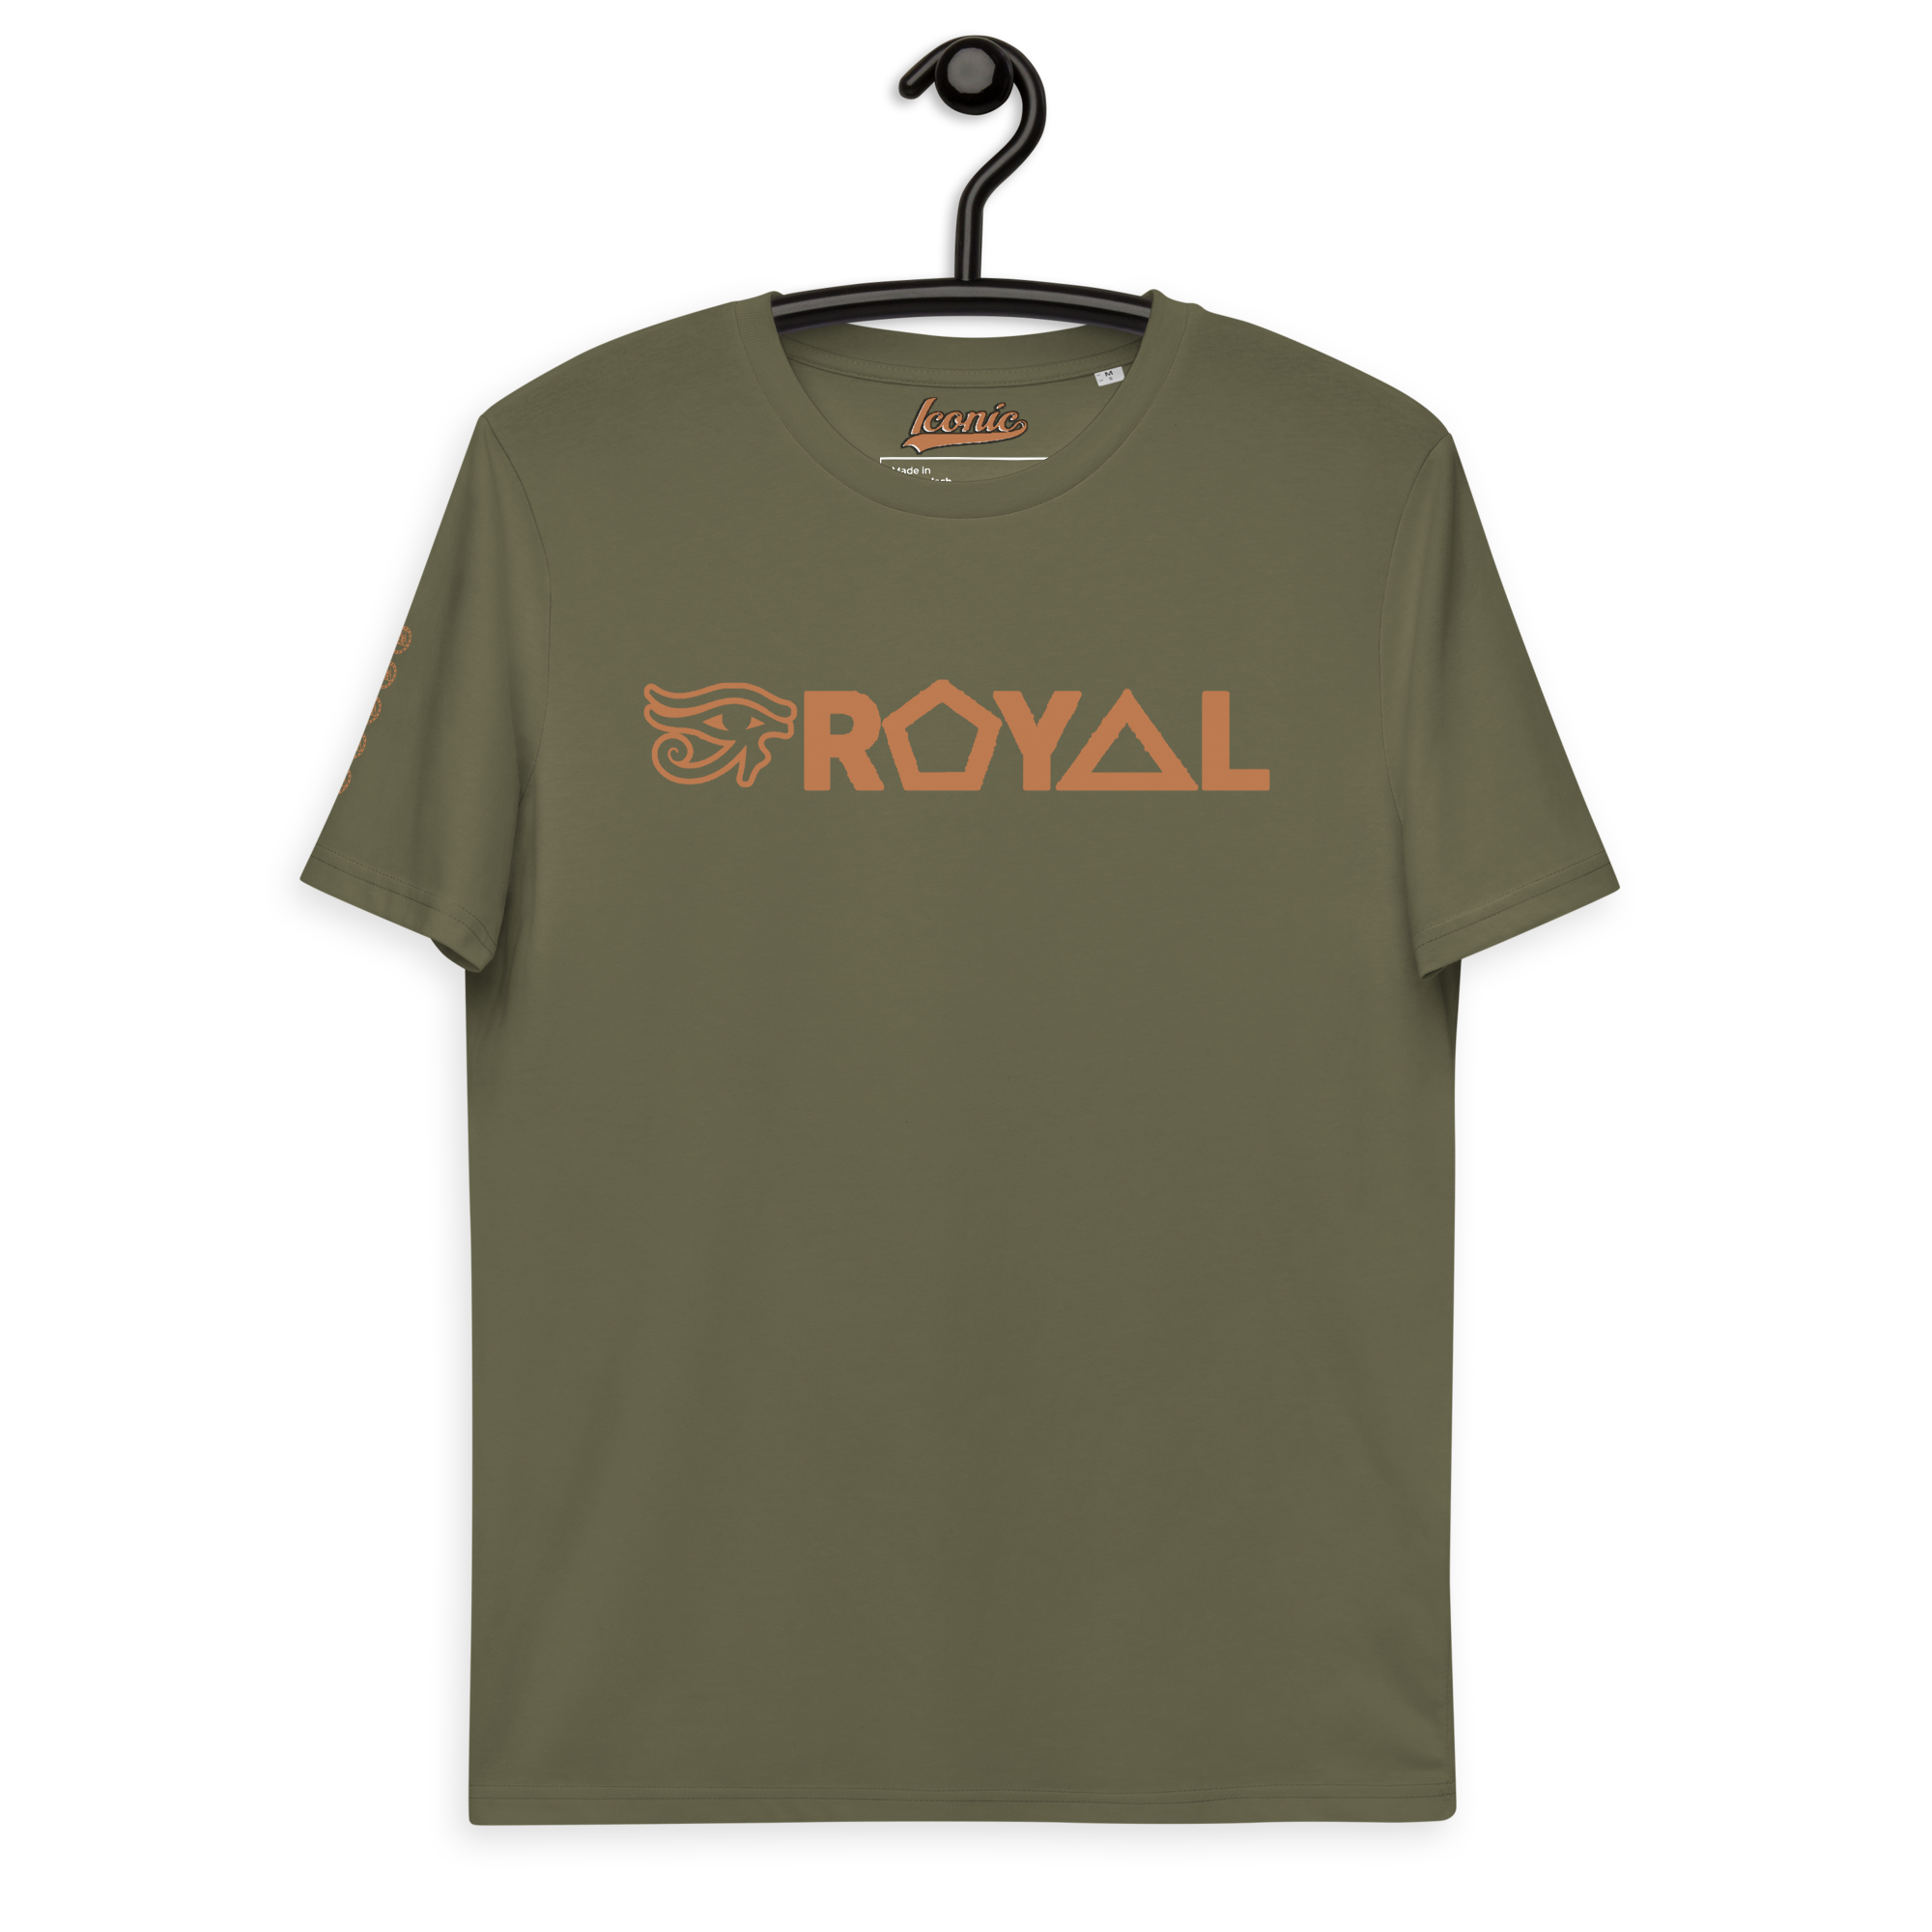 Royal ICONIC. Grand Rising Unisex organic cotton tee COLOR VARIETIES